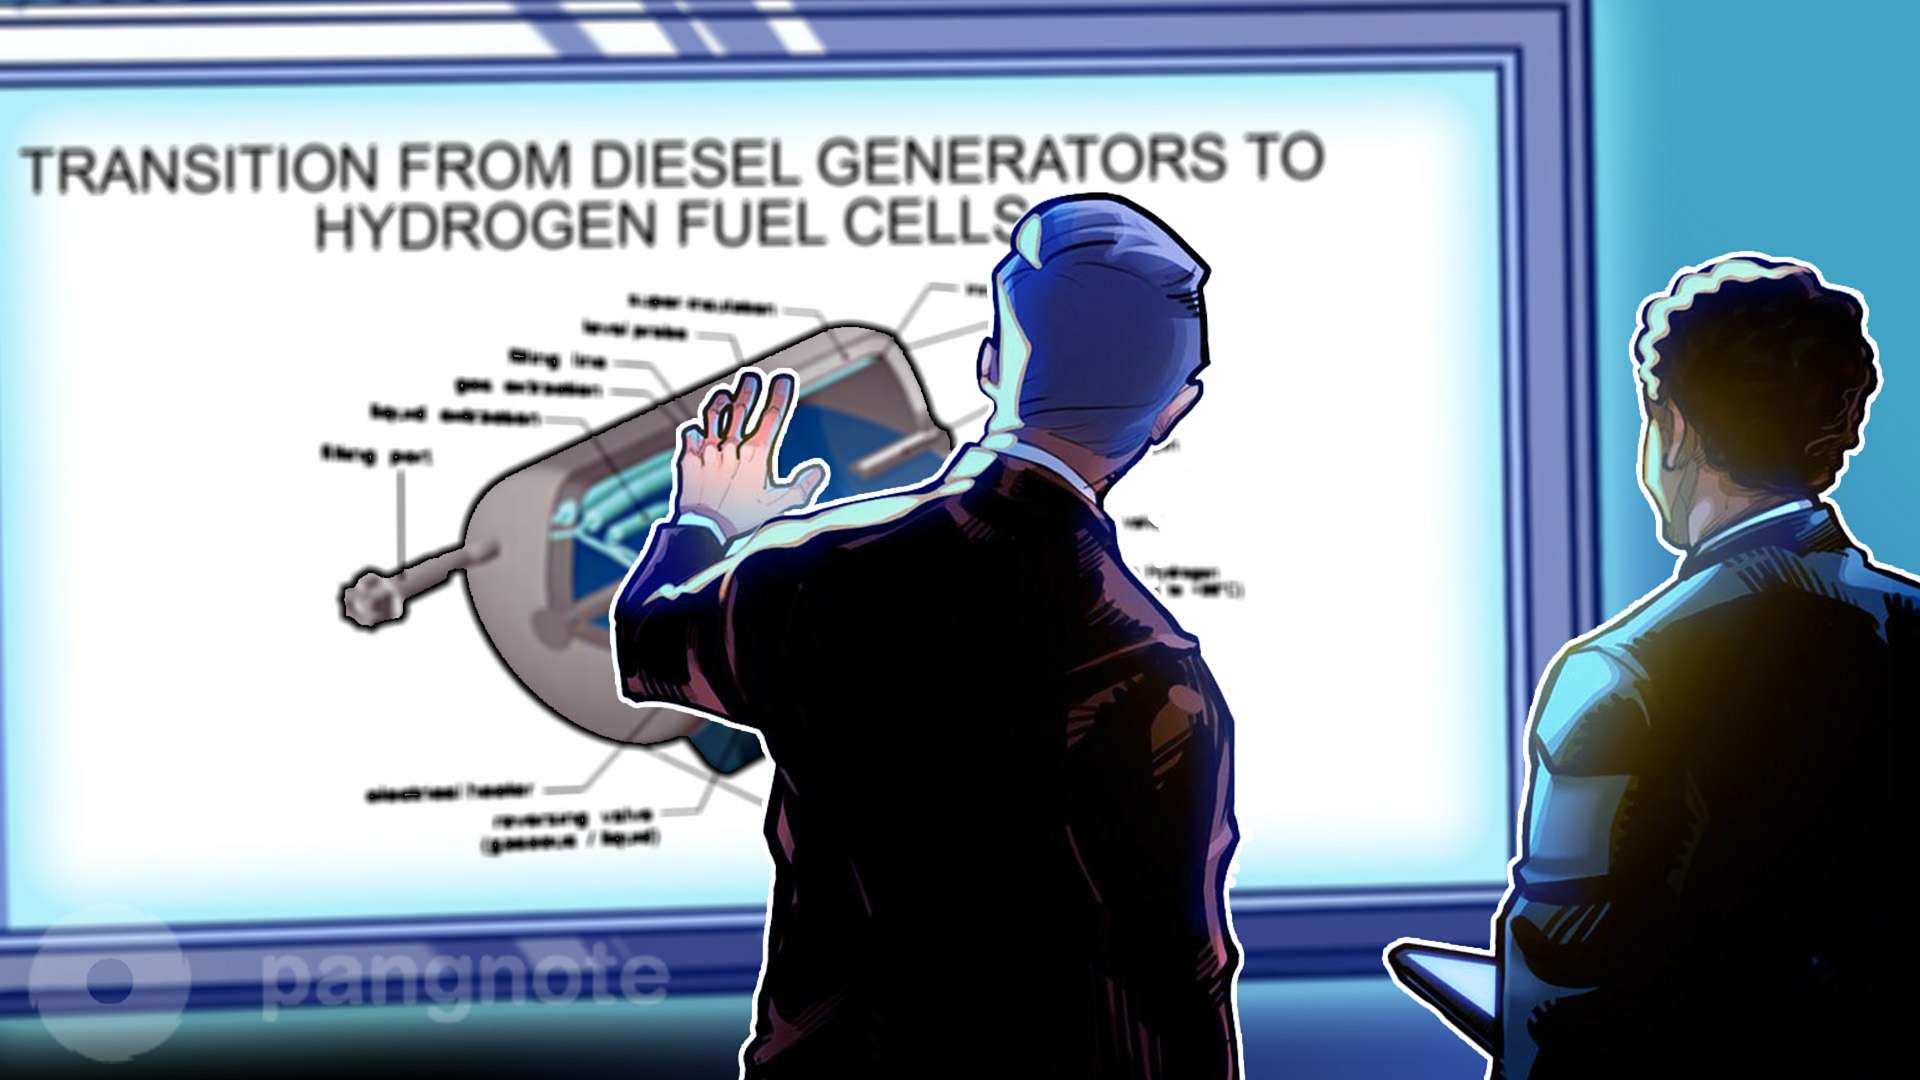 Prospects for Data Center Transition from Diesel Generators to Hydrogen Fuel Cells